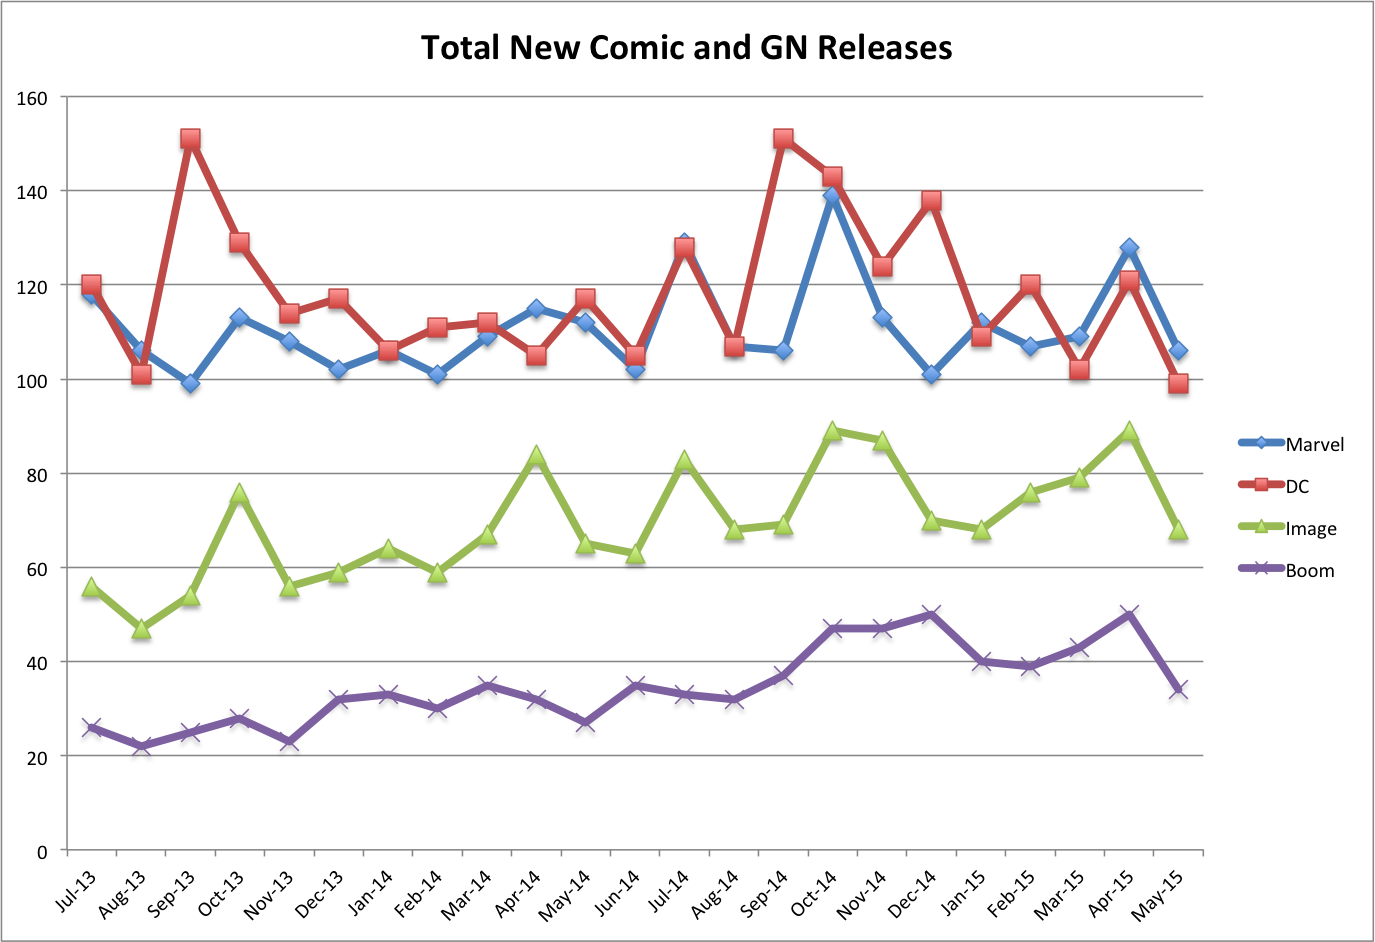 New Comics and GNs Per Publisher